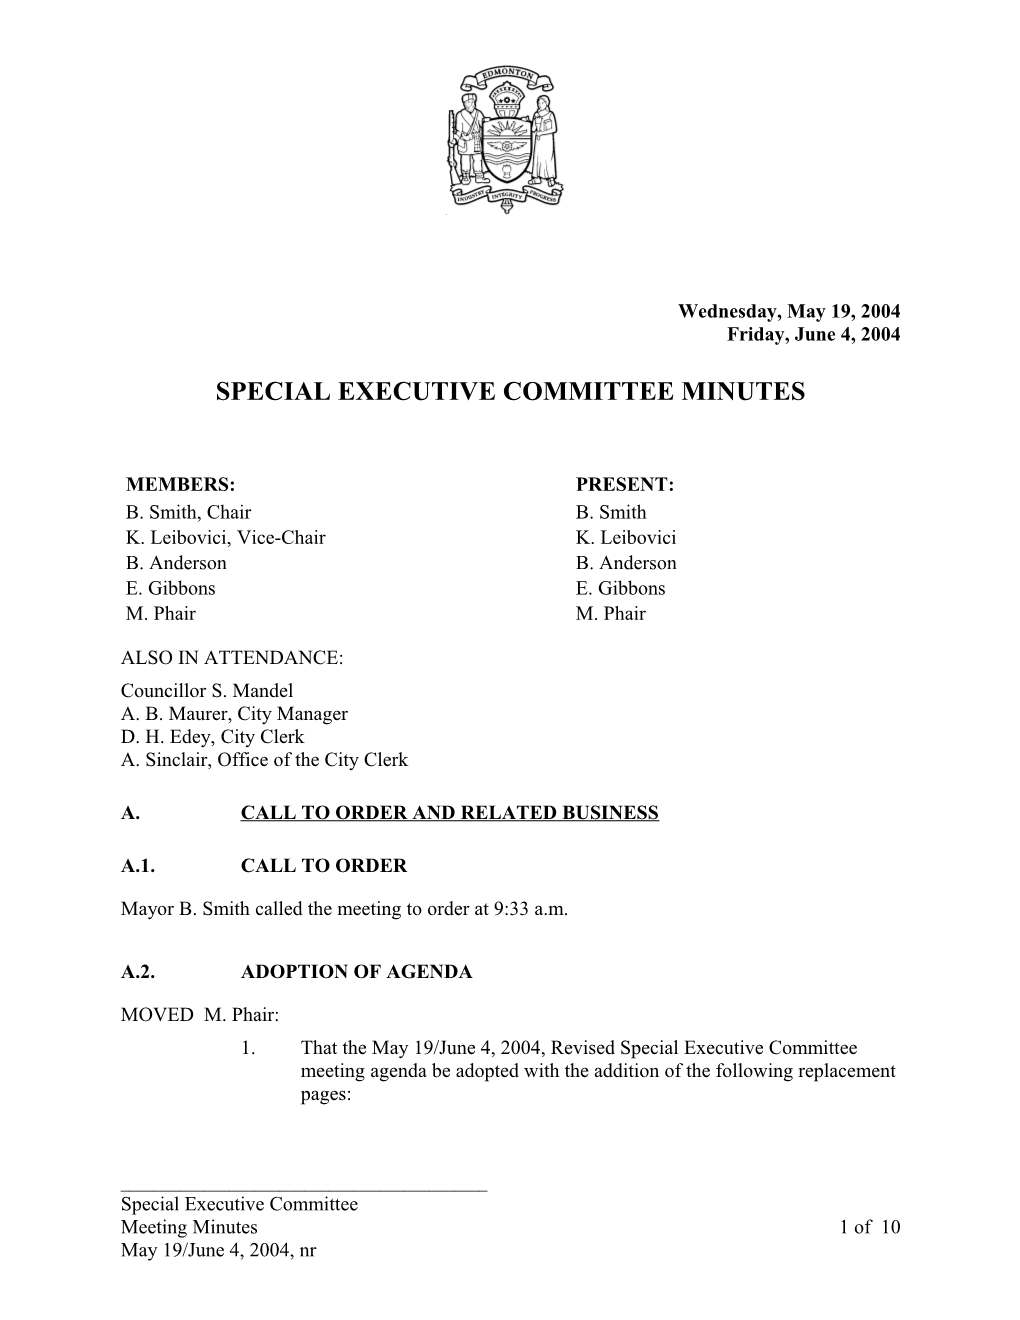 Minutes for Executive Committee May 19, 2004 Meeting